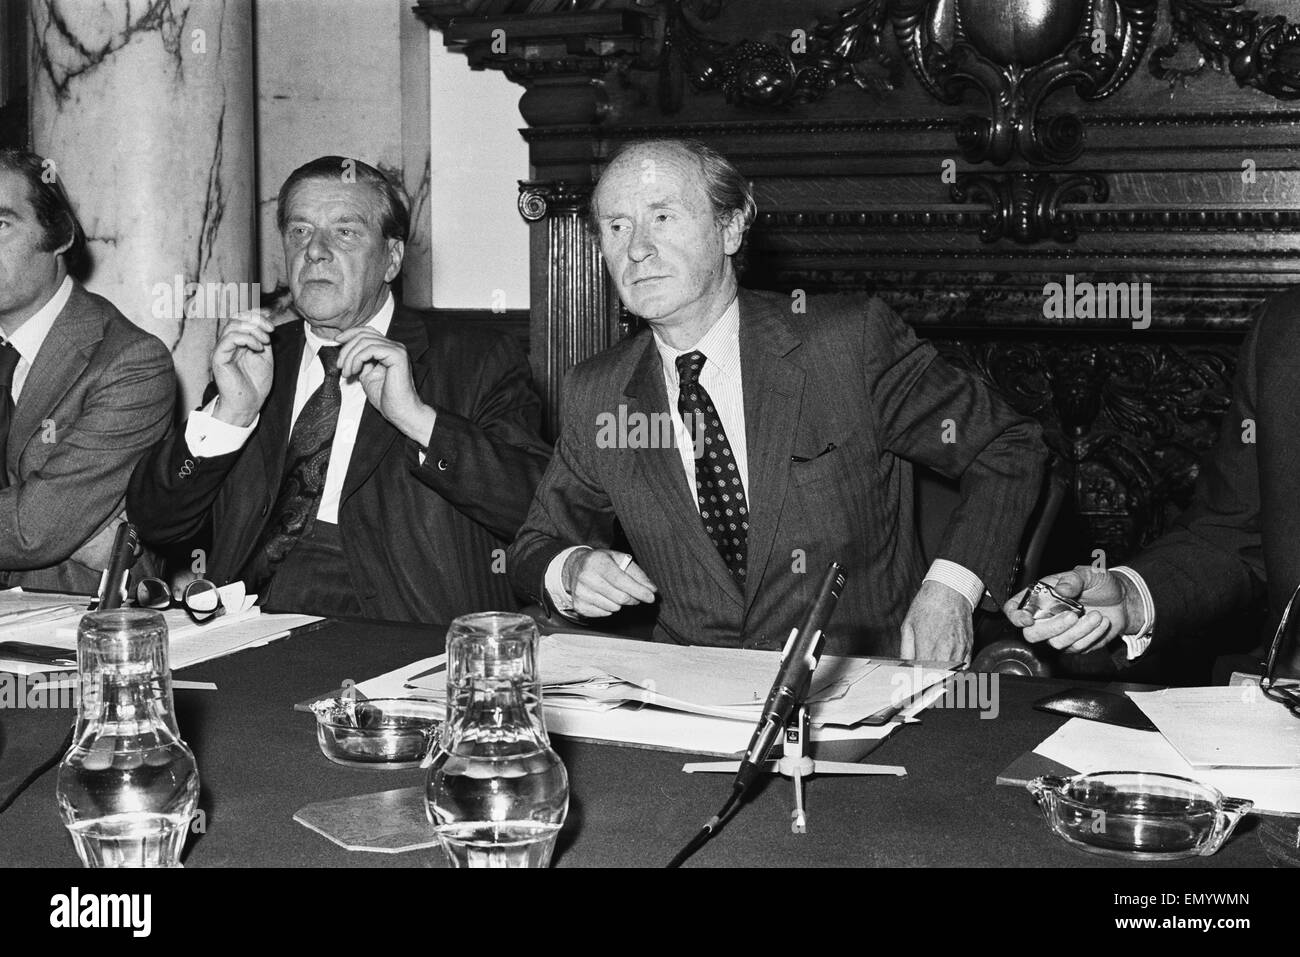 Chancellor of the Exchequer Anthony Barber with General Secratary of the TUC Vic Fether, during talks at 10 Downing Street. 27th July 1973. Stock Photo